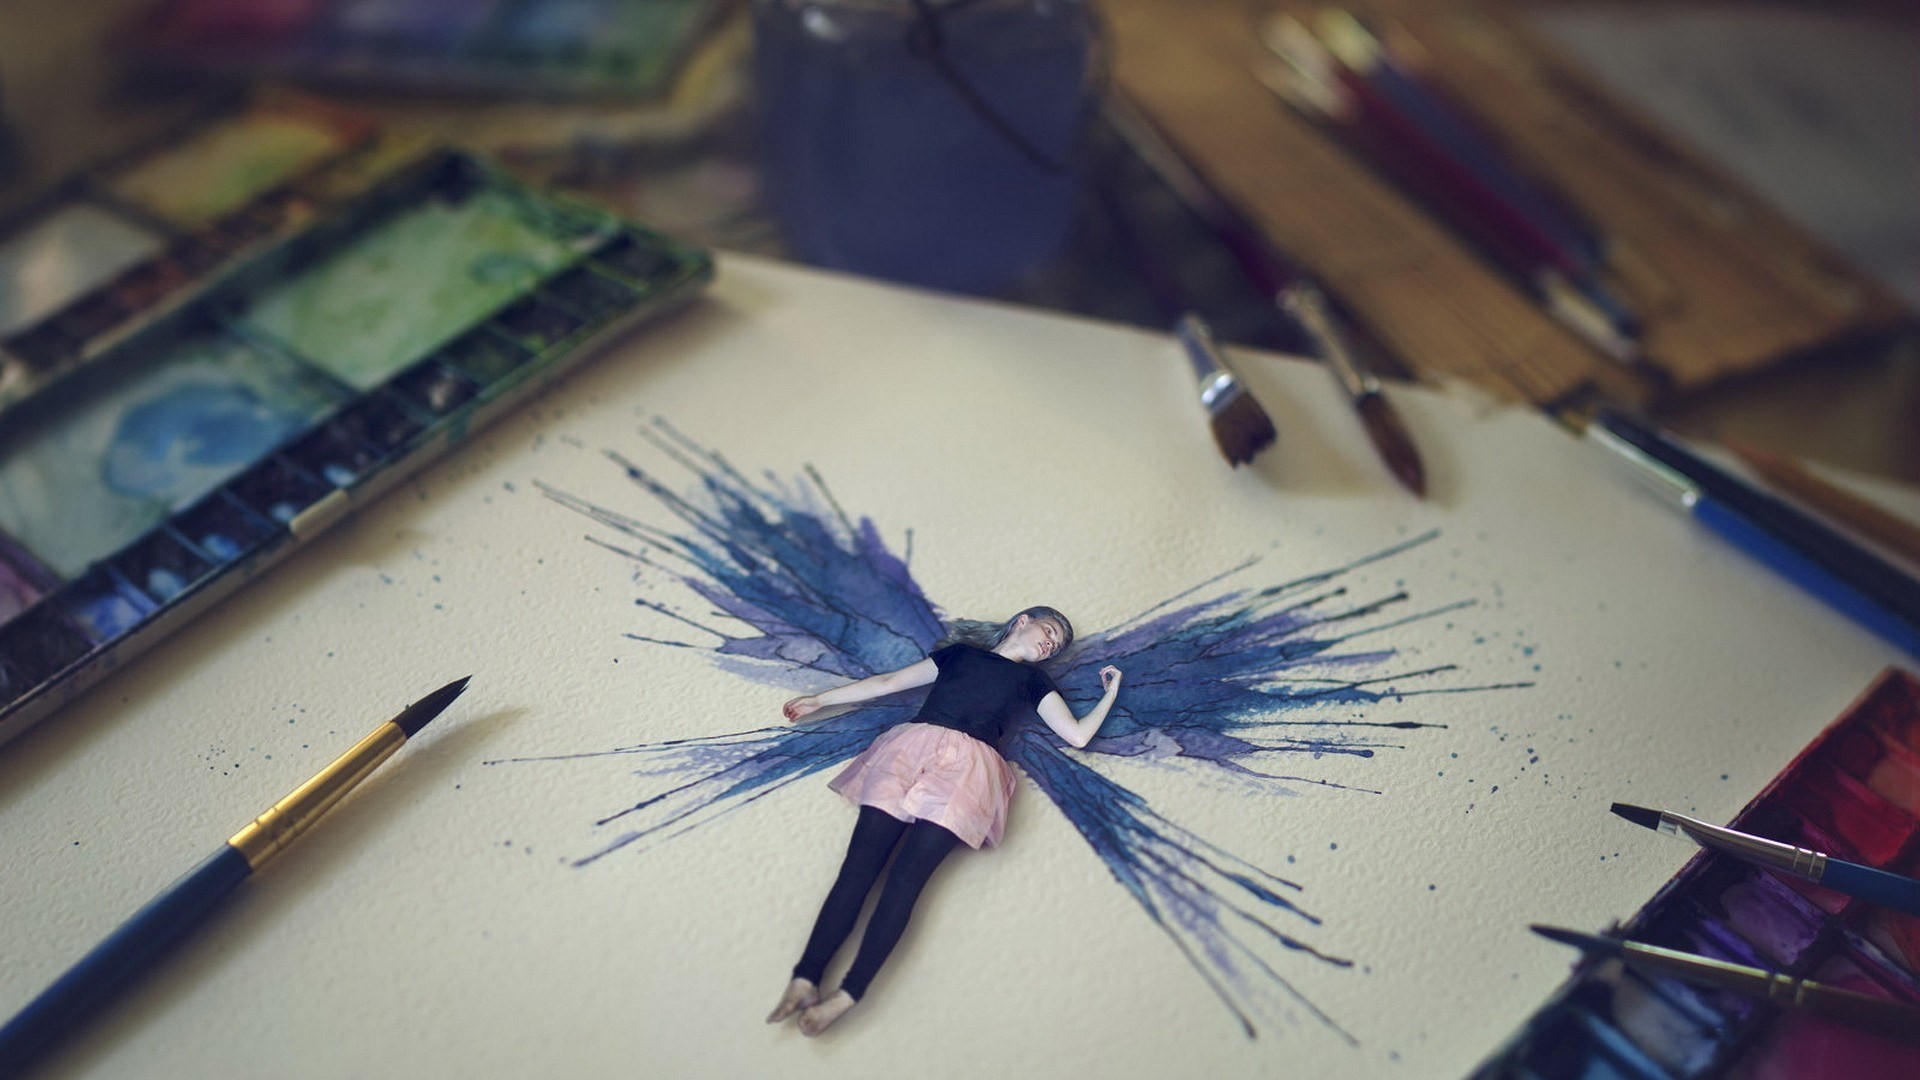 General 1920x1080 fantasy art women photo manipulation wings painting paint brushes paper lying on back colorful depth of field black top skirt barefoot miniatures